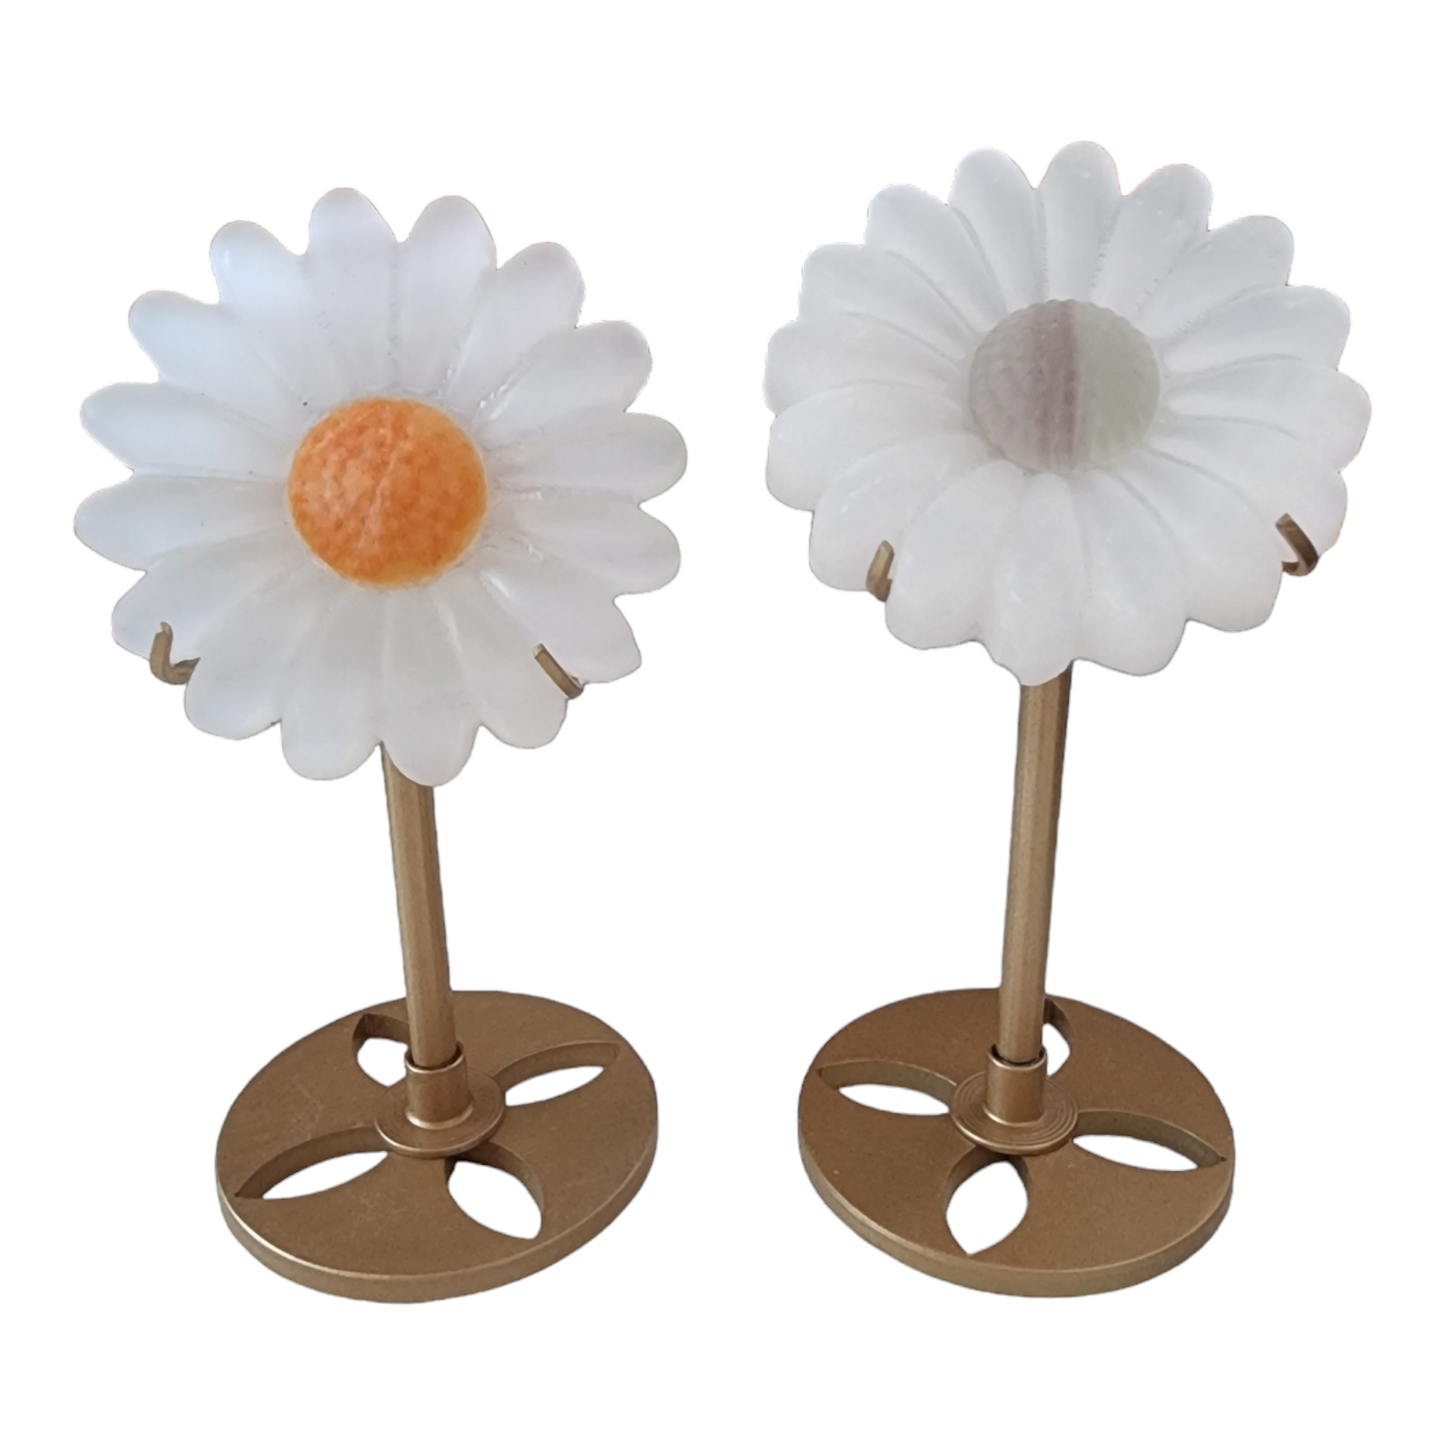 Selenite Daisies on Stands